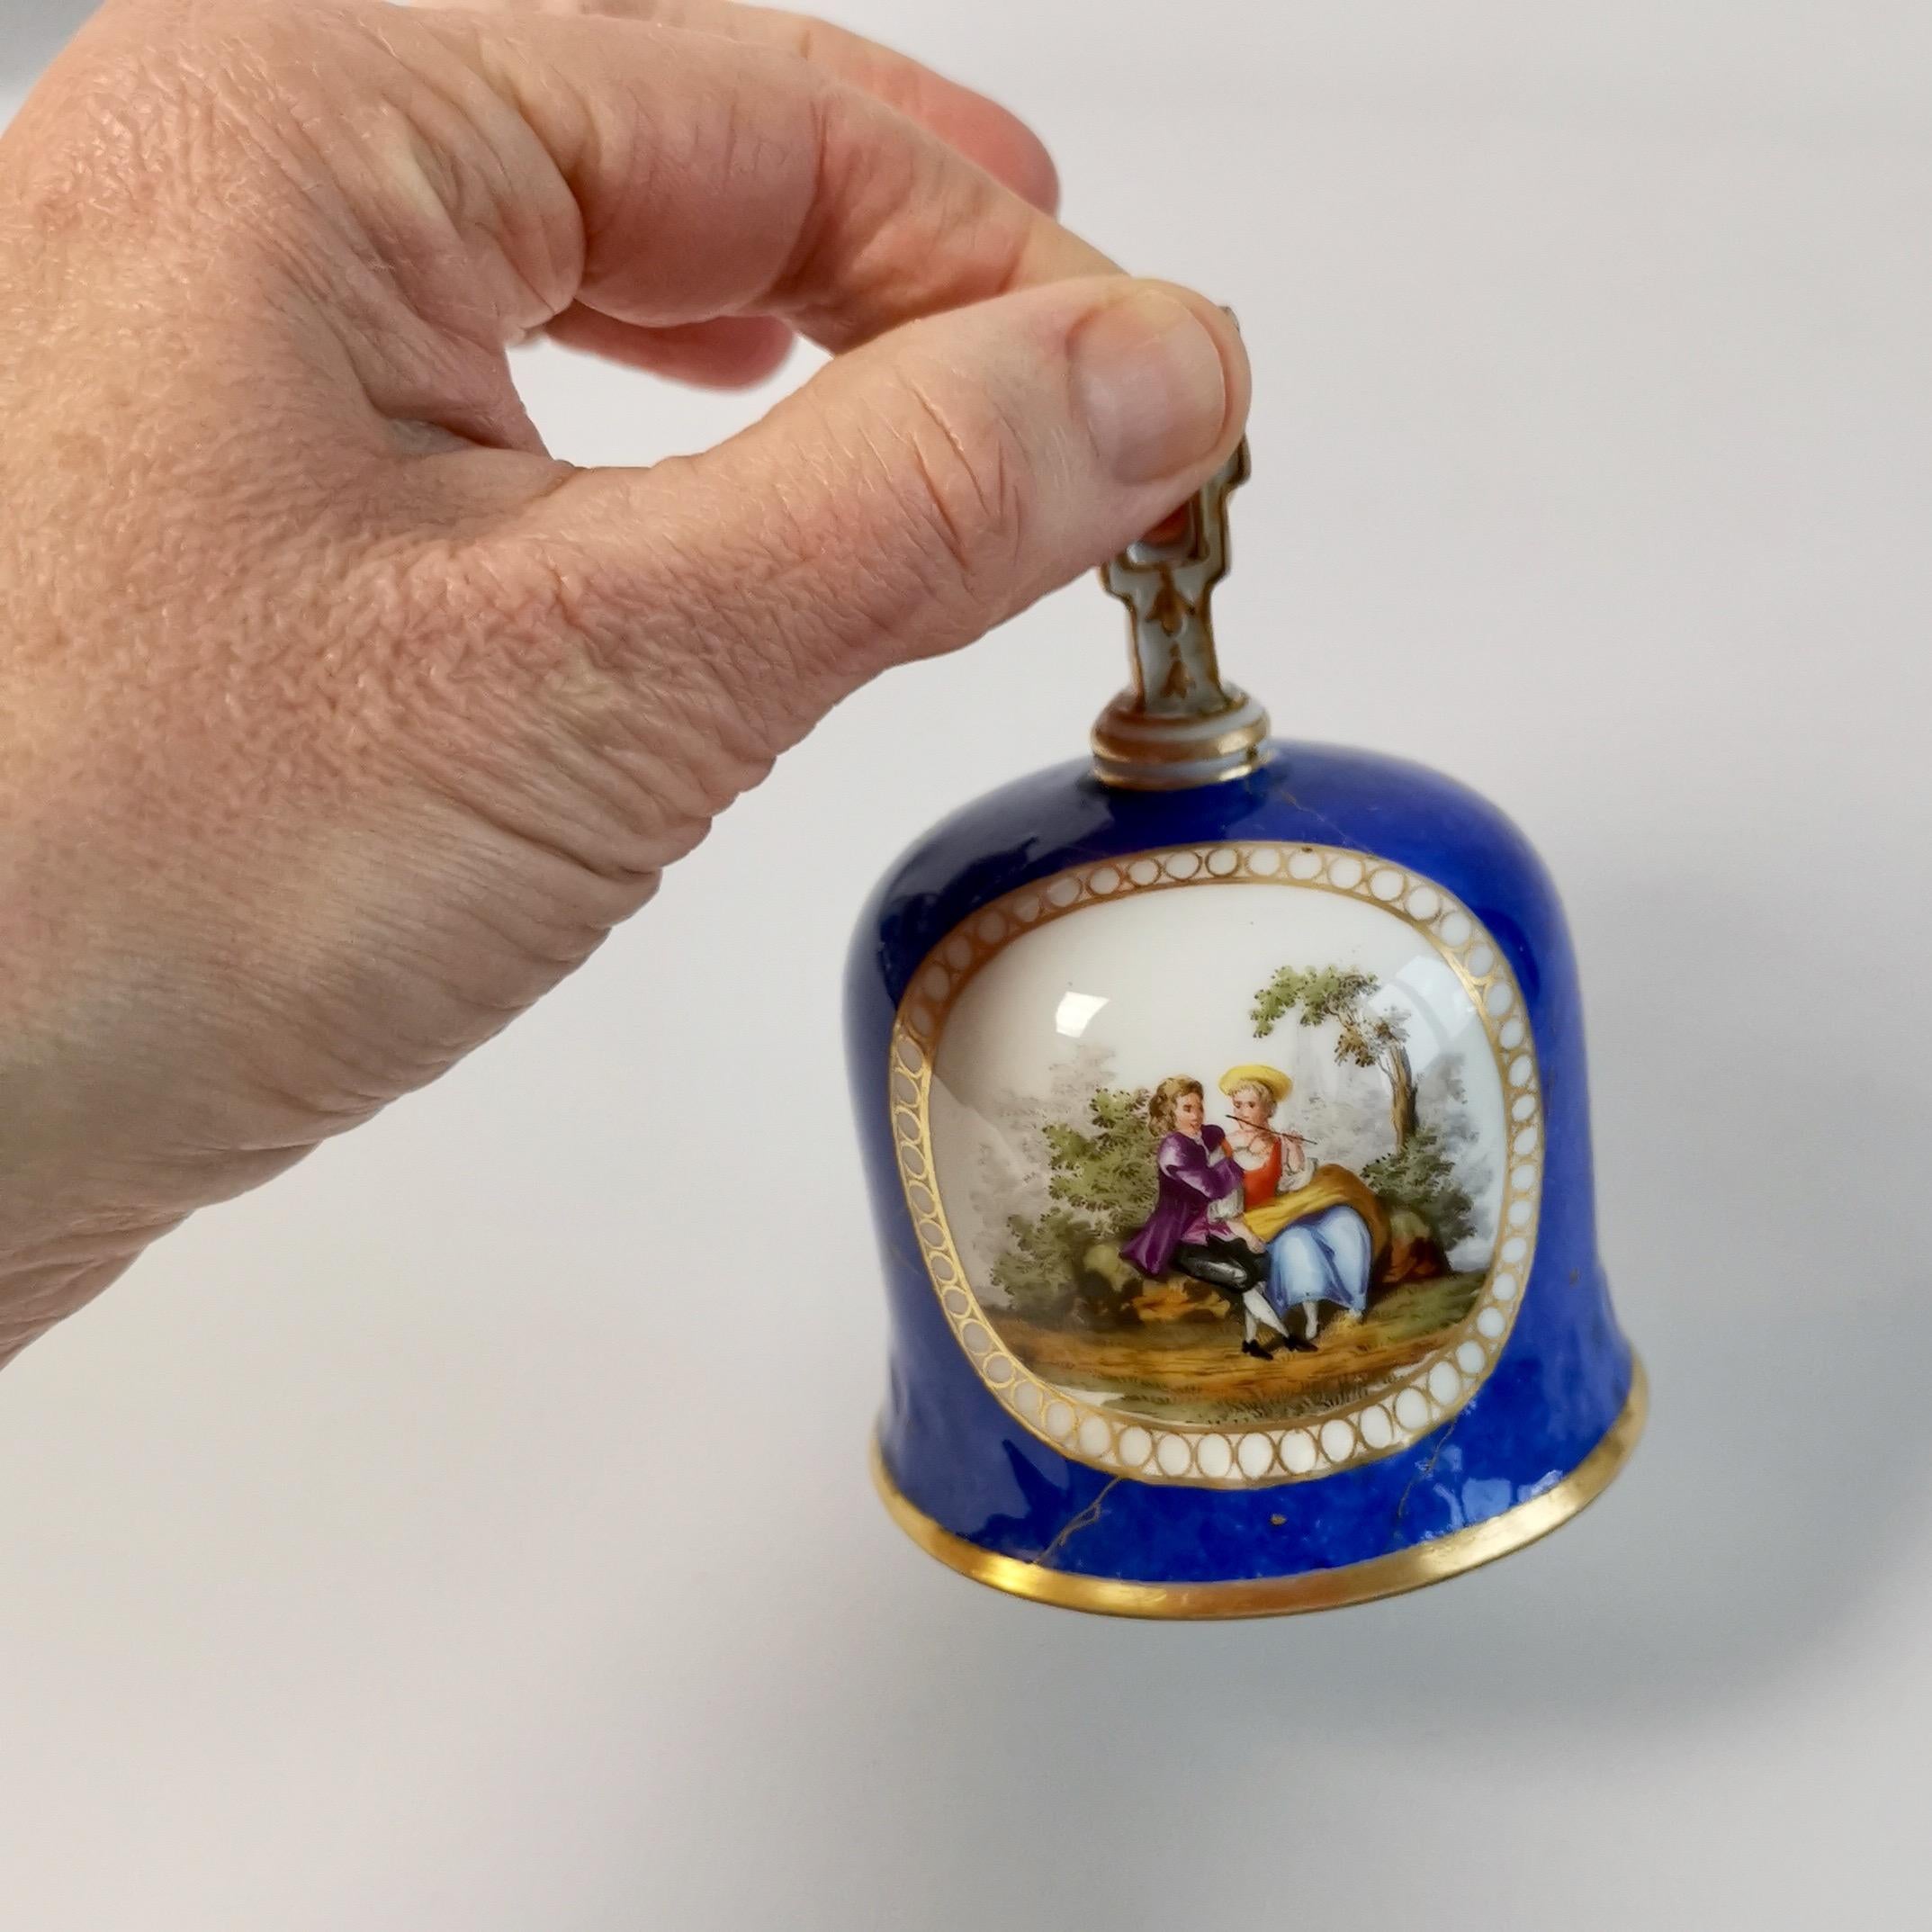 This is a very charming table bell made by Meissen in the 19th Century. The bell has a royal blue ground, slightly marbled with gilt, and two romantic scenes on either side. The bell has a light wooden clapper and a very clear sound.
 
The Meissen